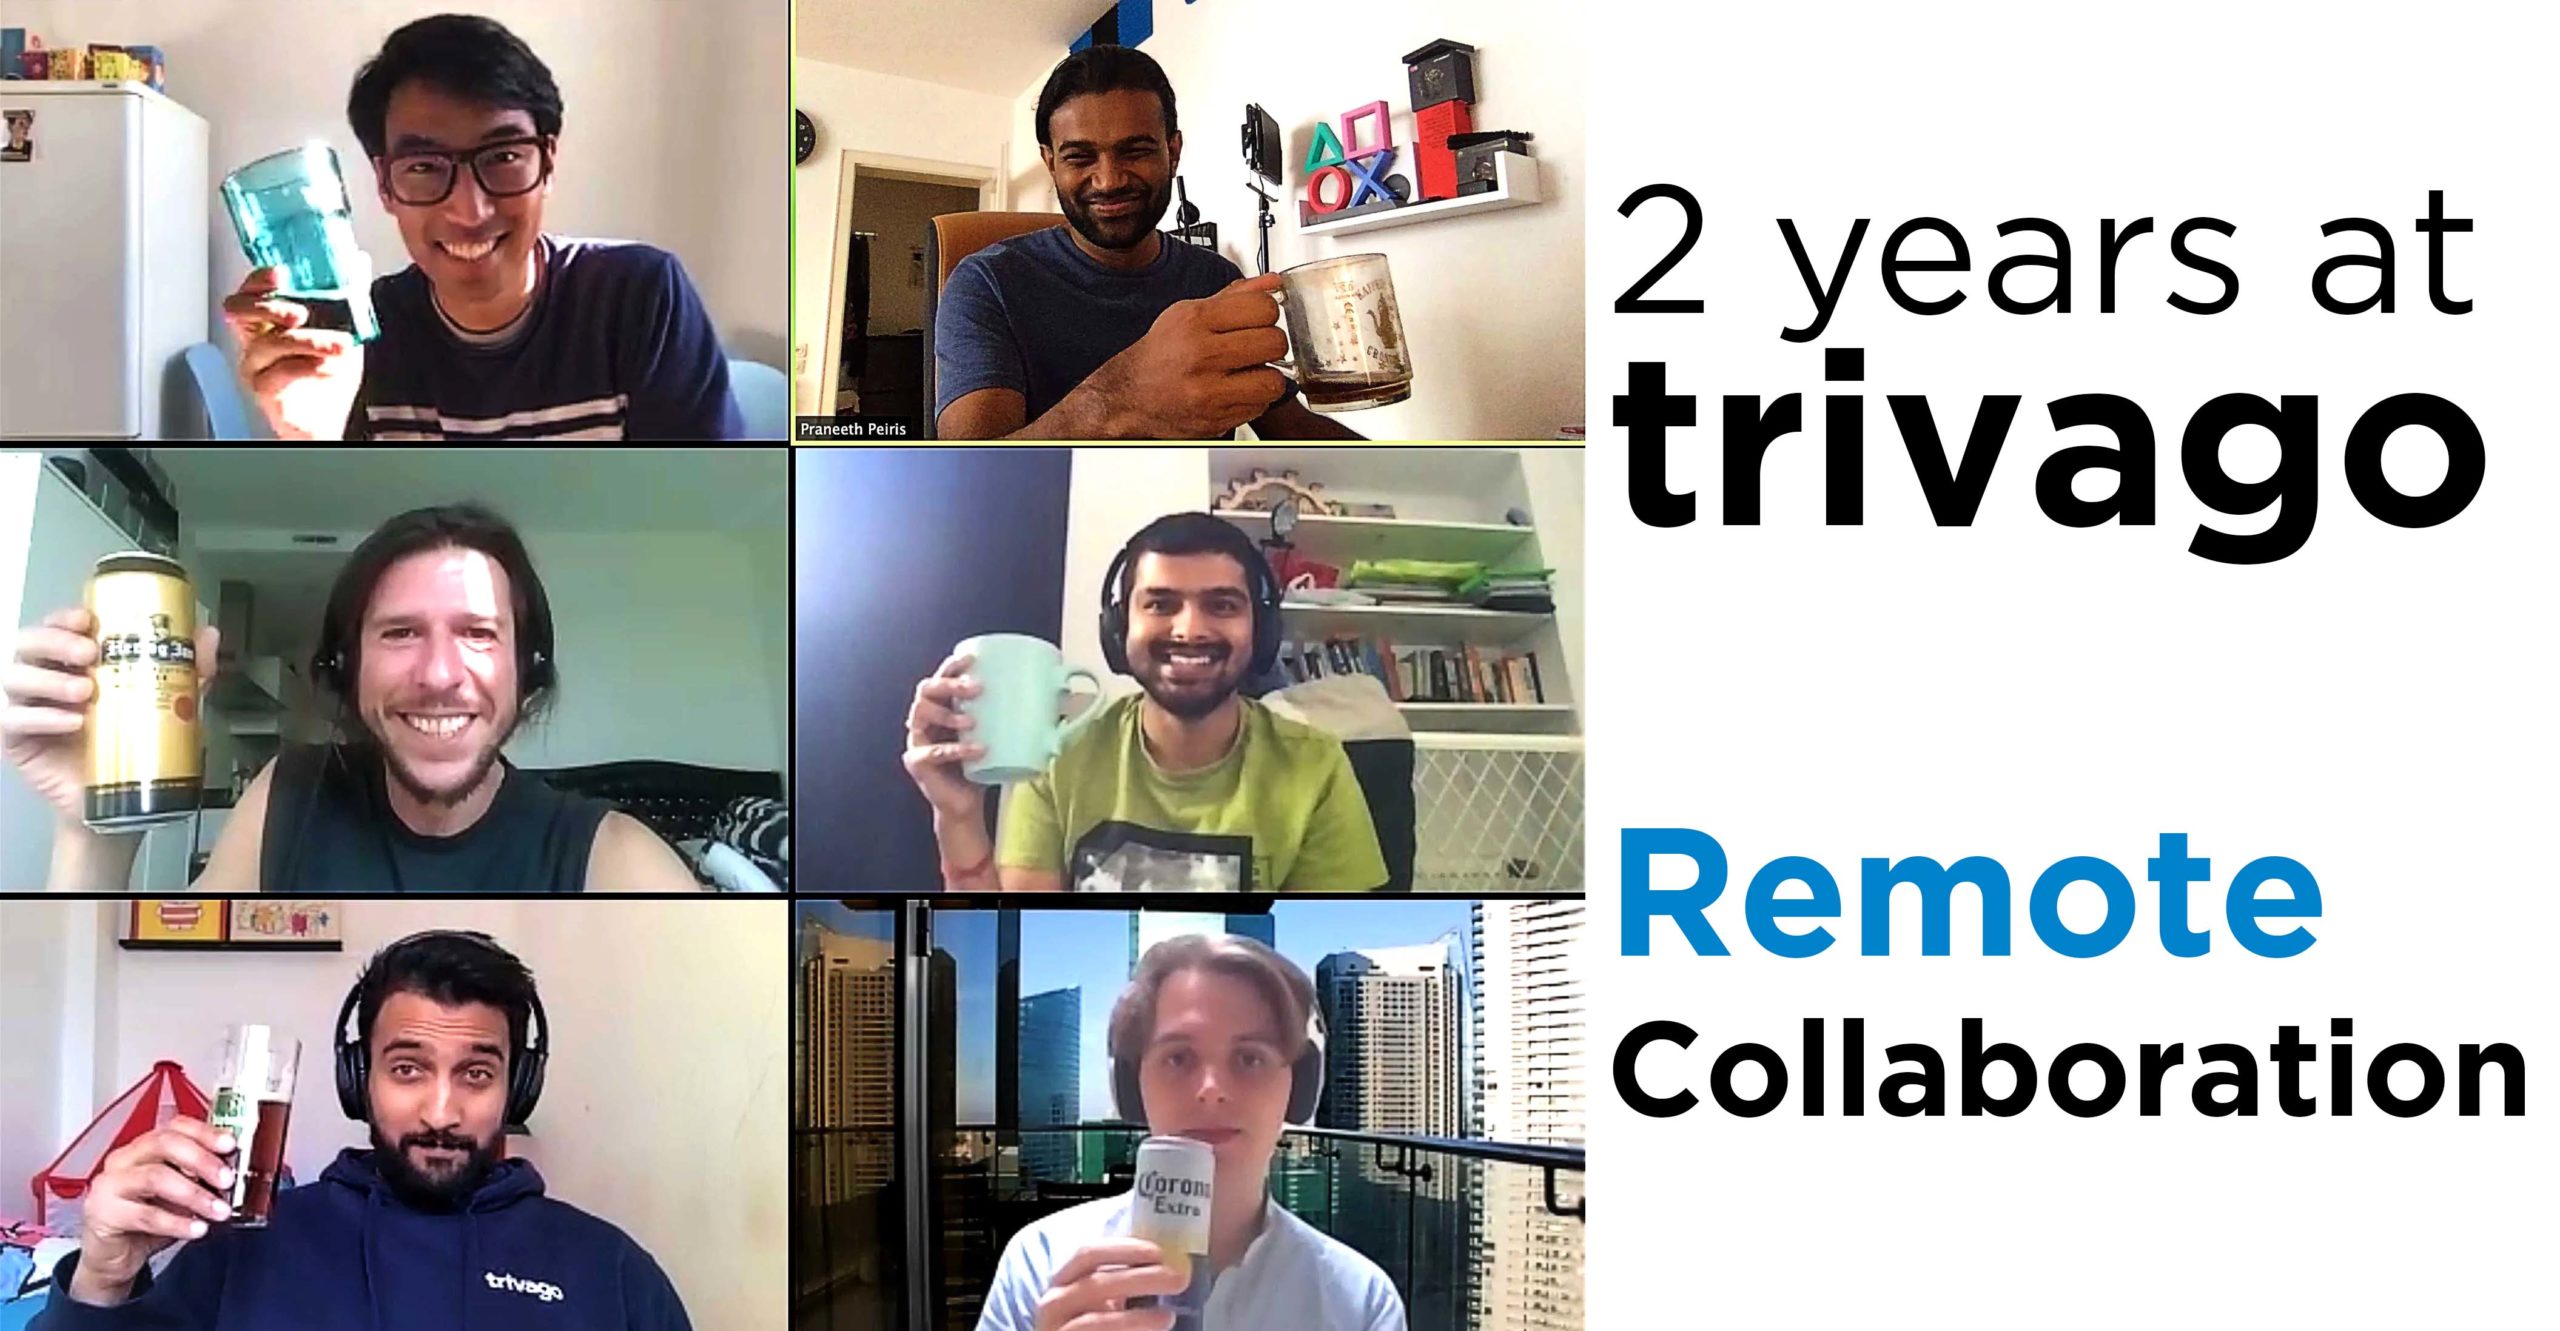 2 years at trivago: Remote Working